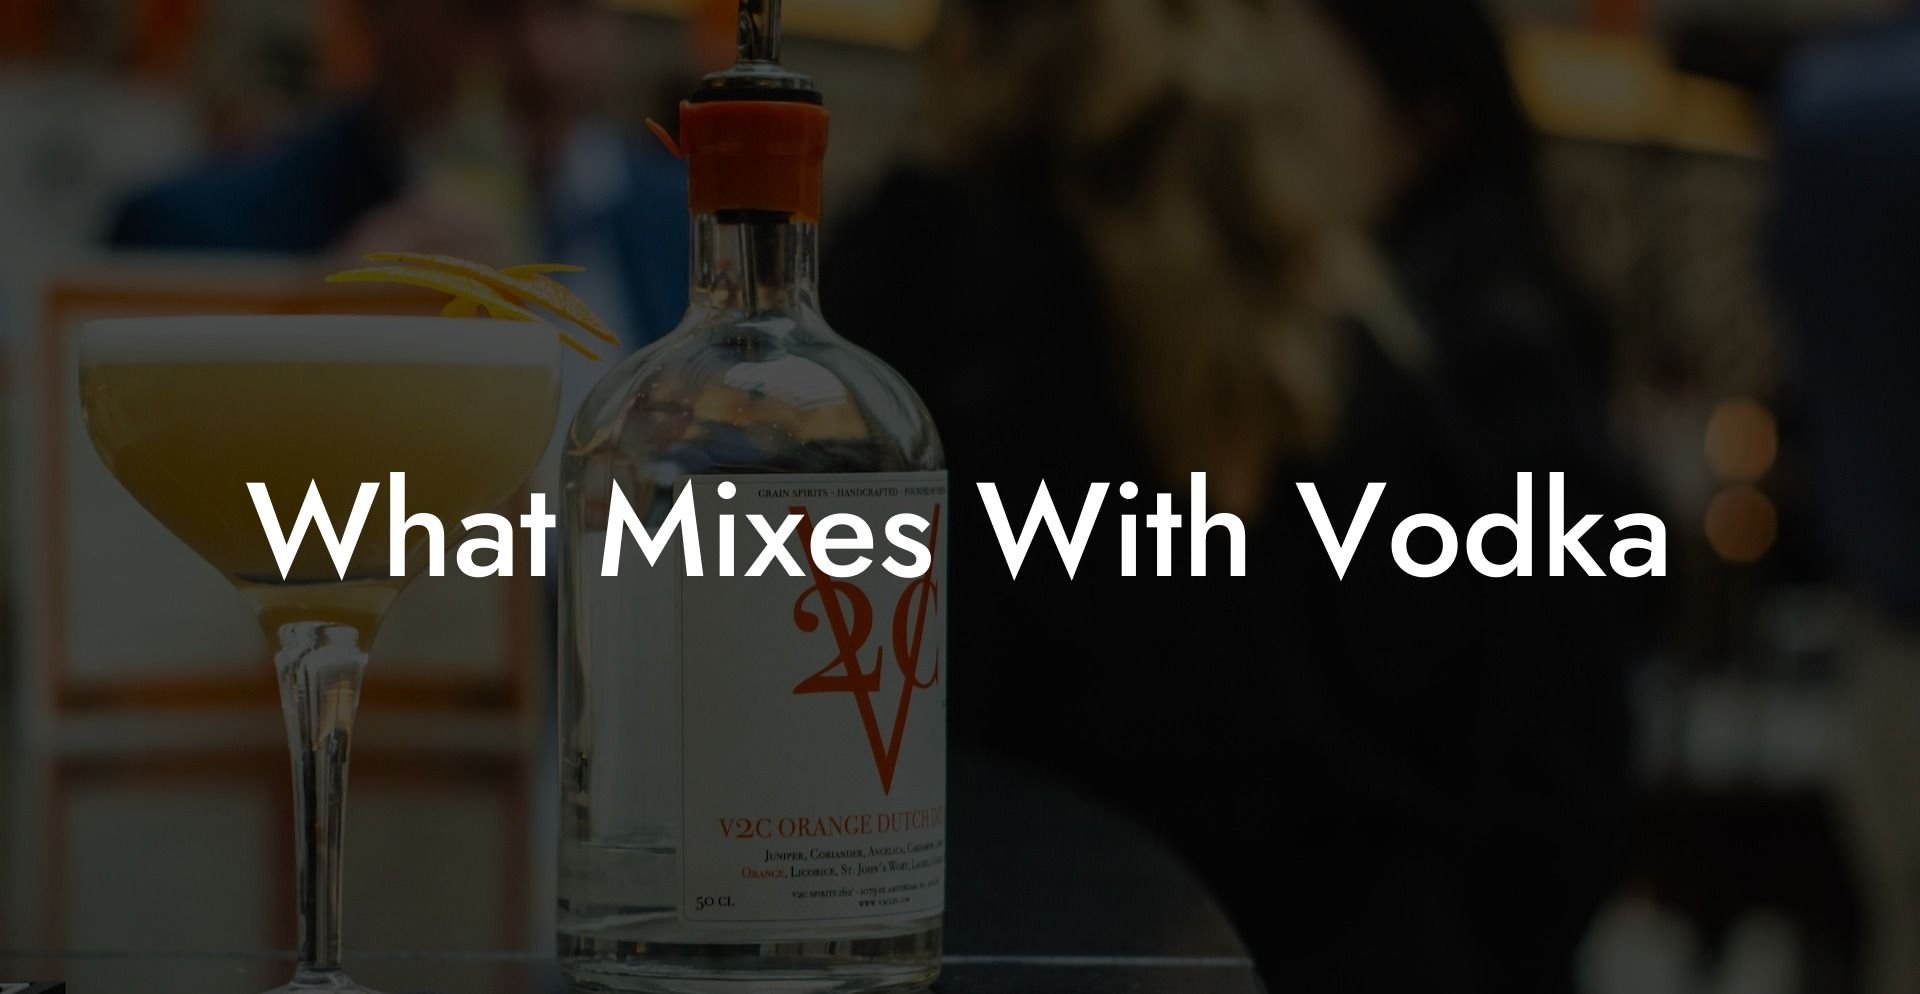 What Mixes With Vodka